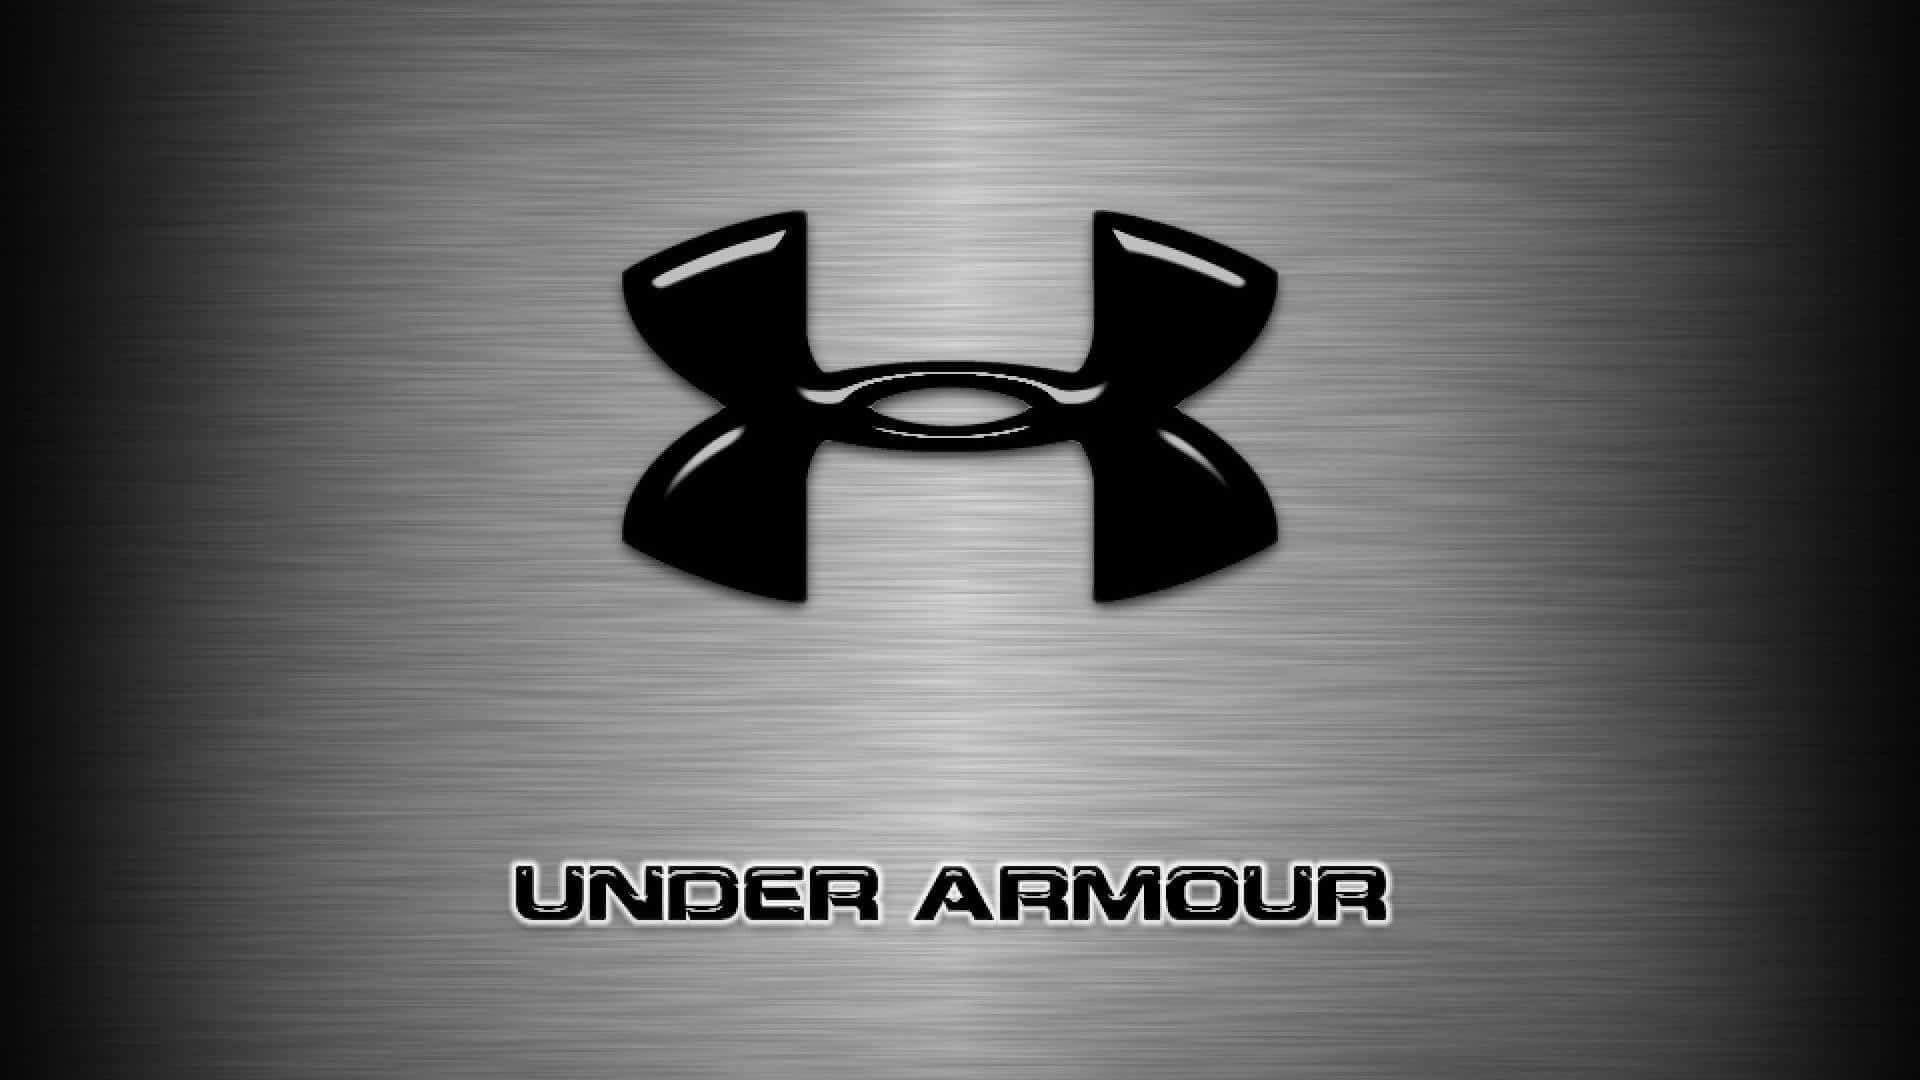 Look unstoppable in the latest Under Armour Athletic Gear.